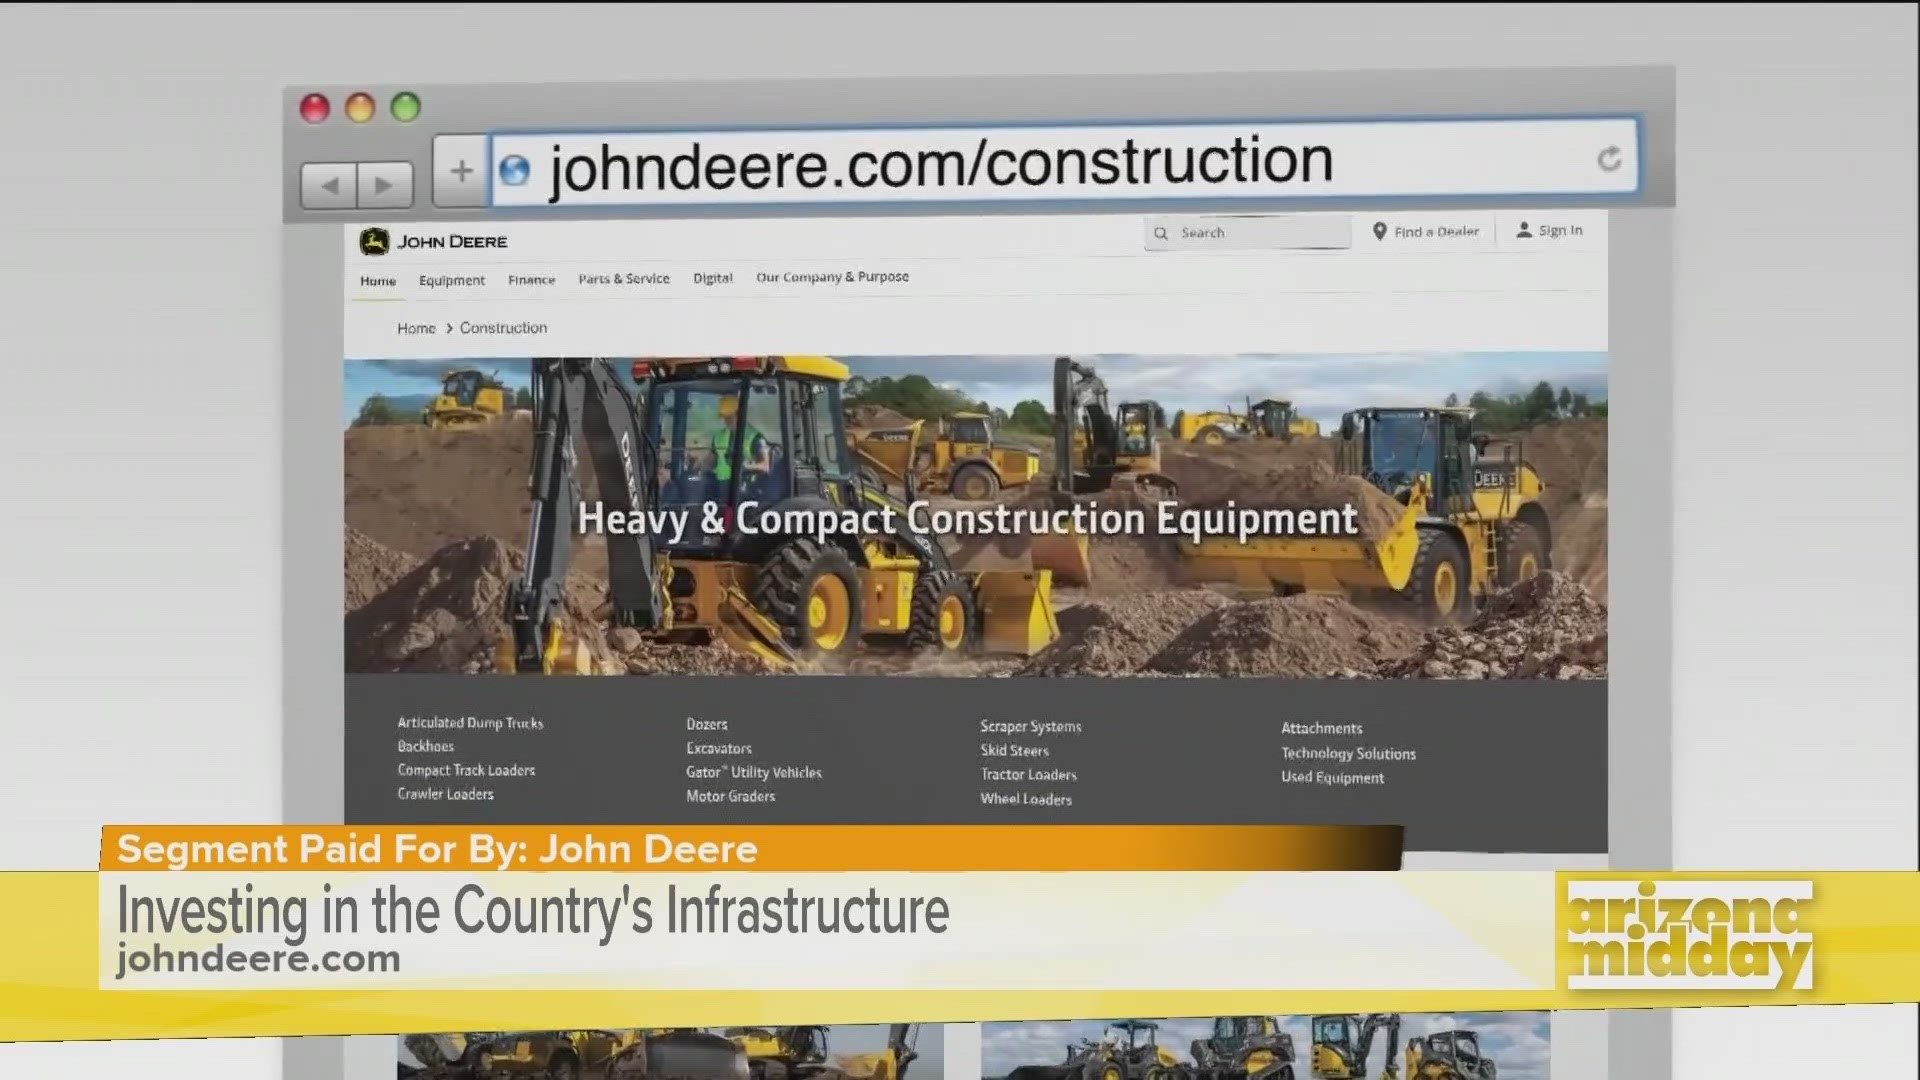 Louann Hausner and Tony Dietz share how John Deere is looking ahead to smarter, safer and sustainable construction equipment as it helps build the Nation.